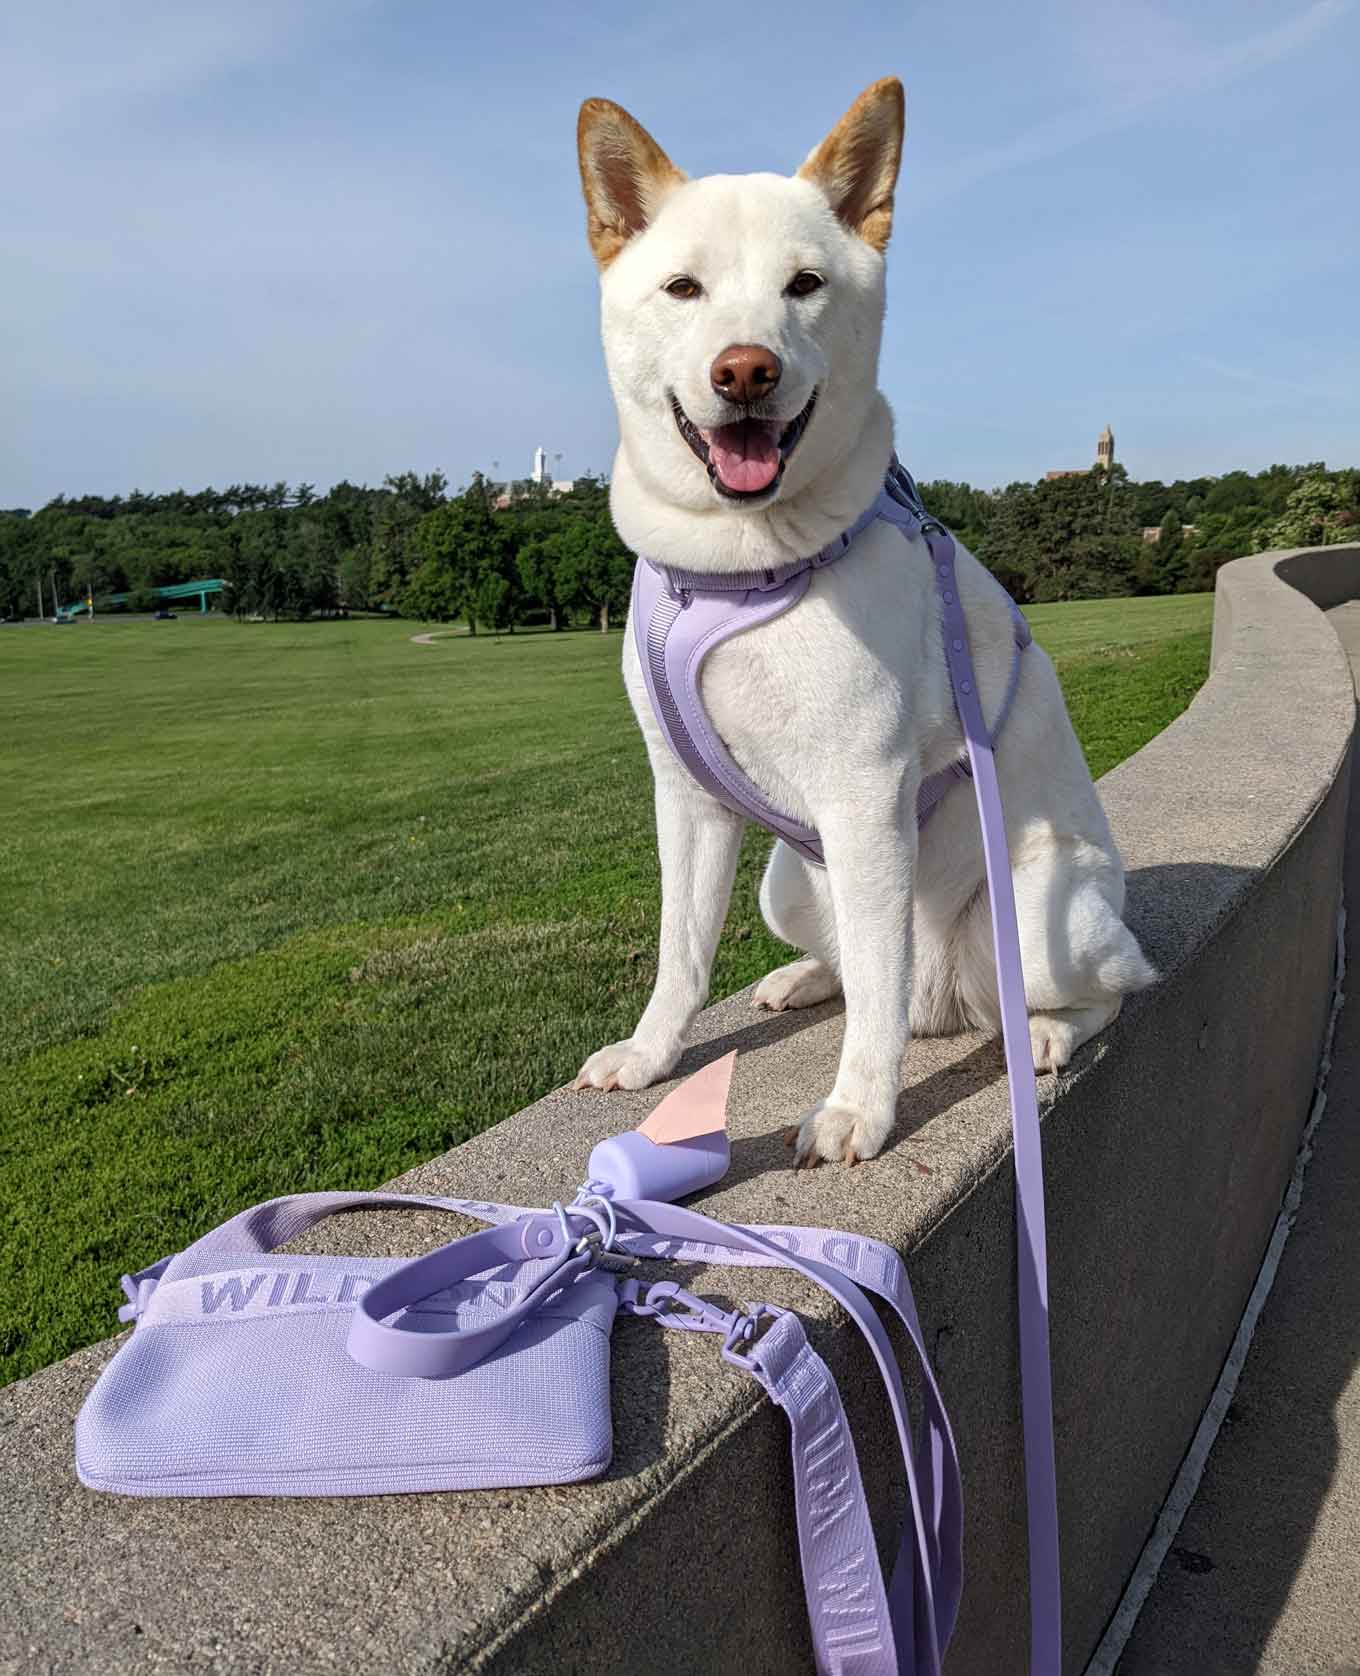 A beautiful white dog with a Wild One harness, leash, and dog bag